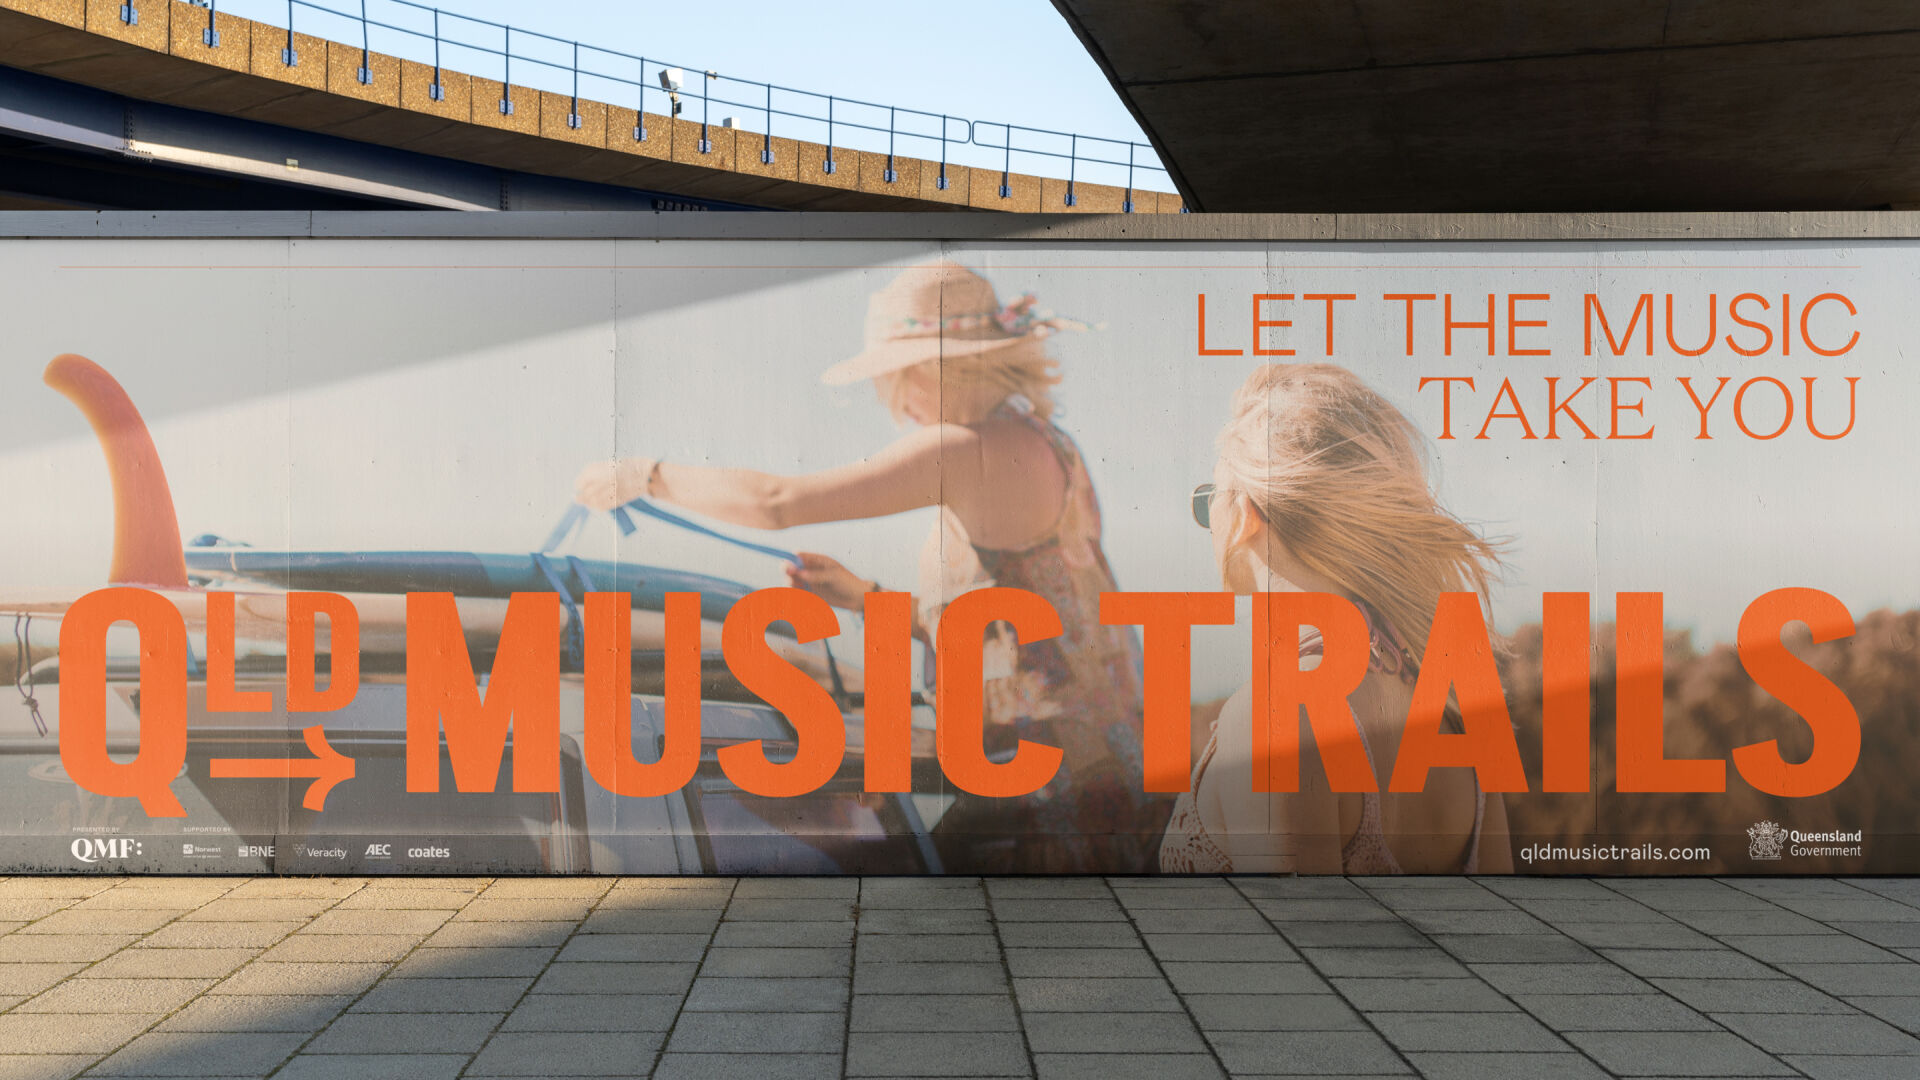 Hoarding designed for the Queensland Music Trails brand.